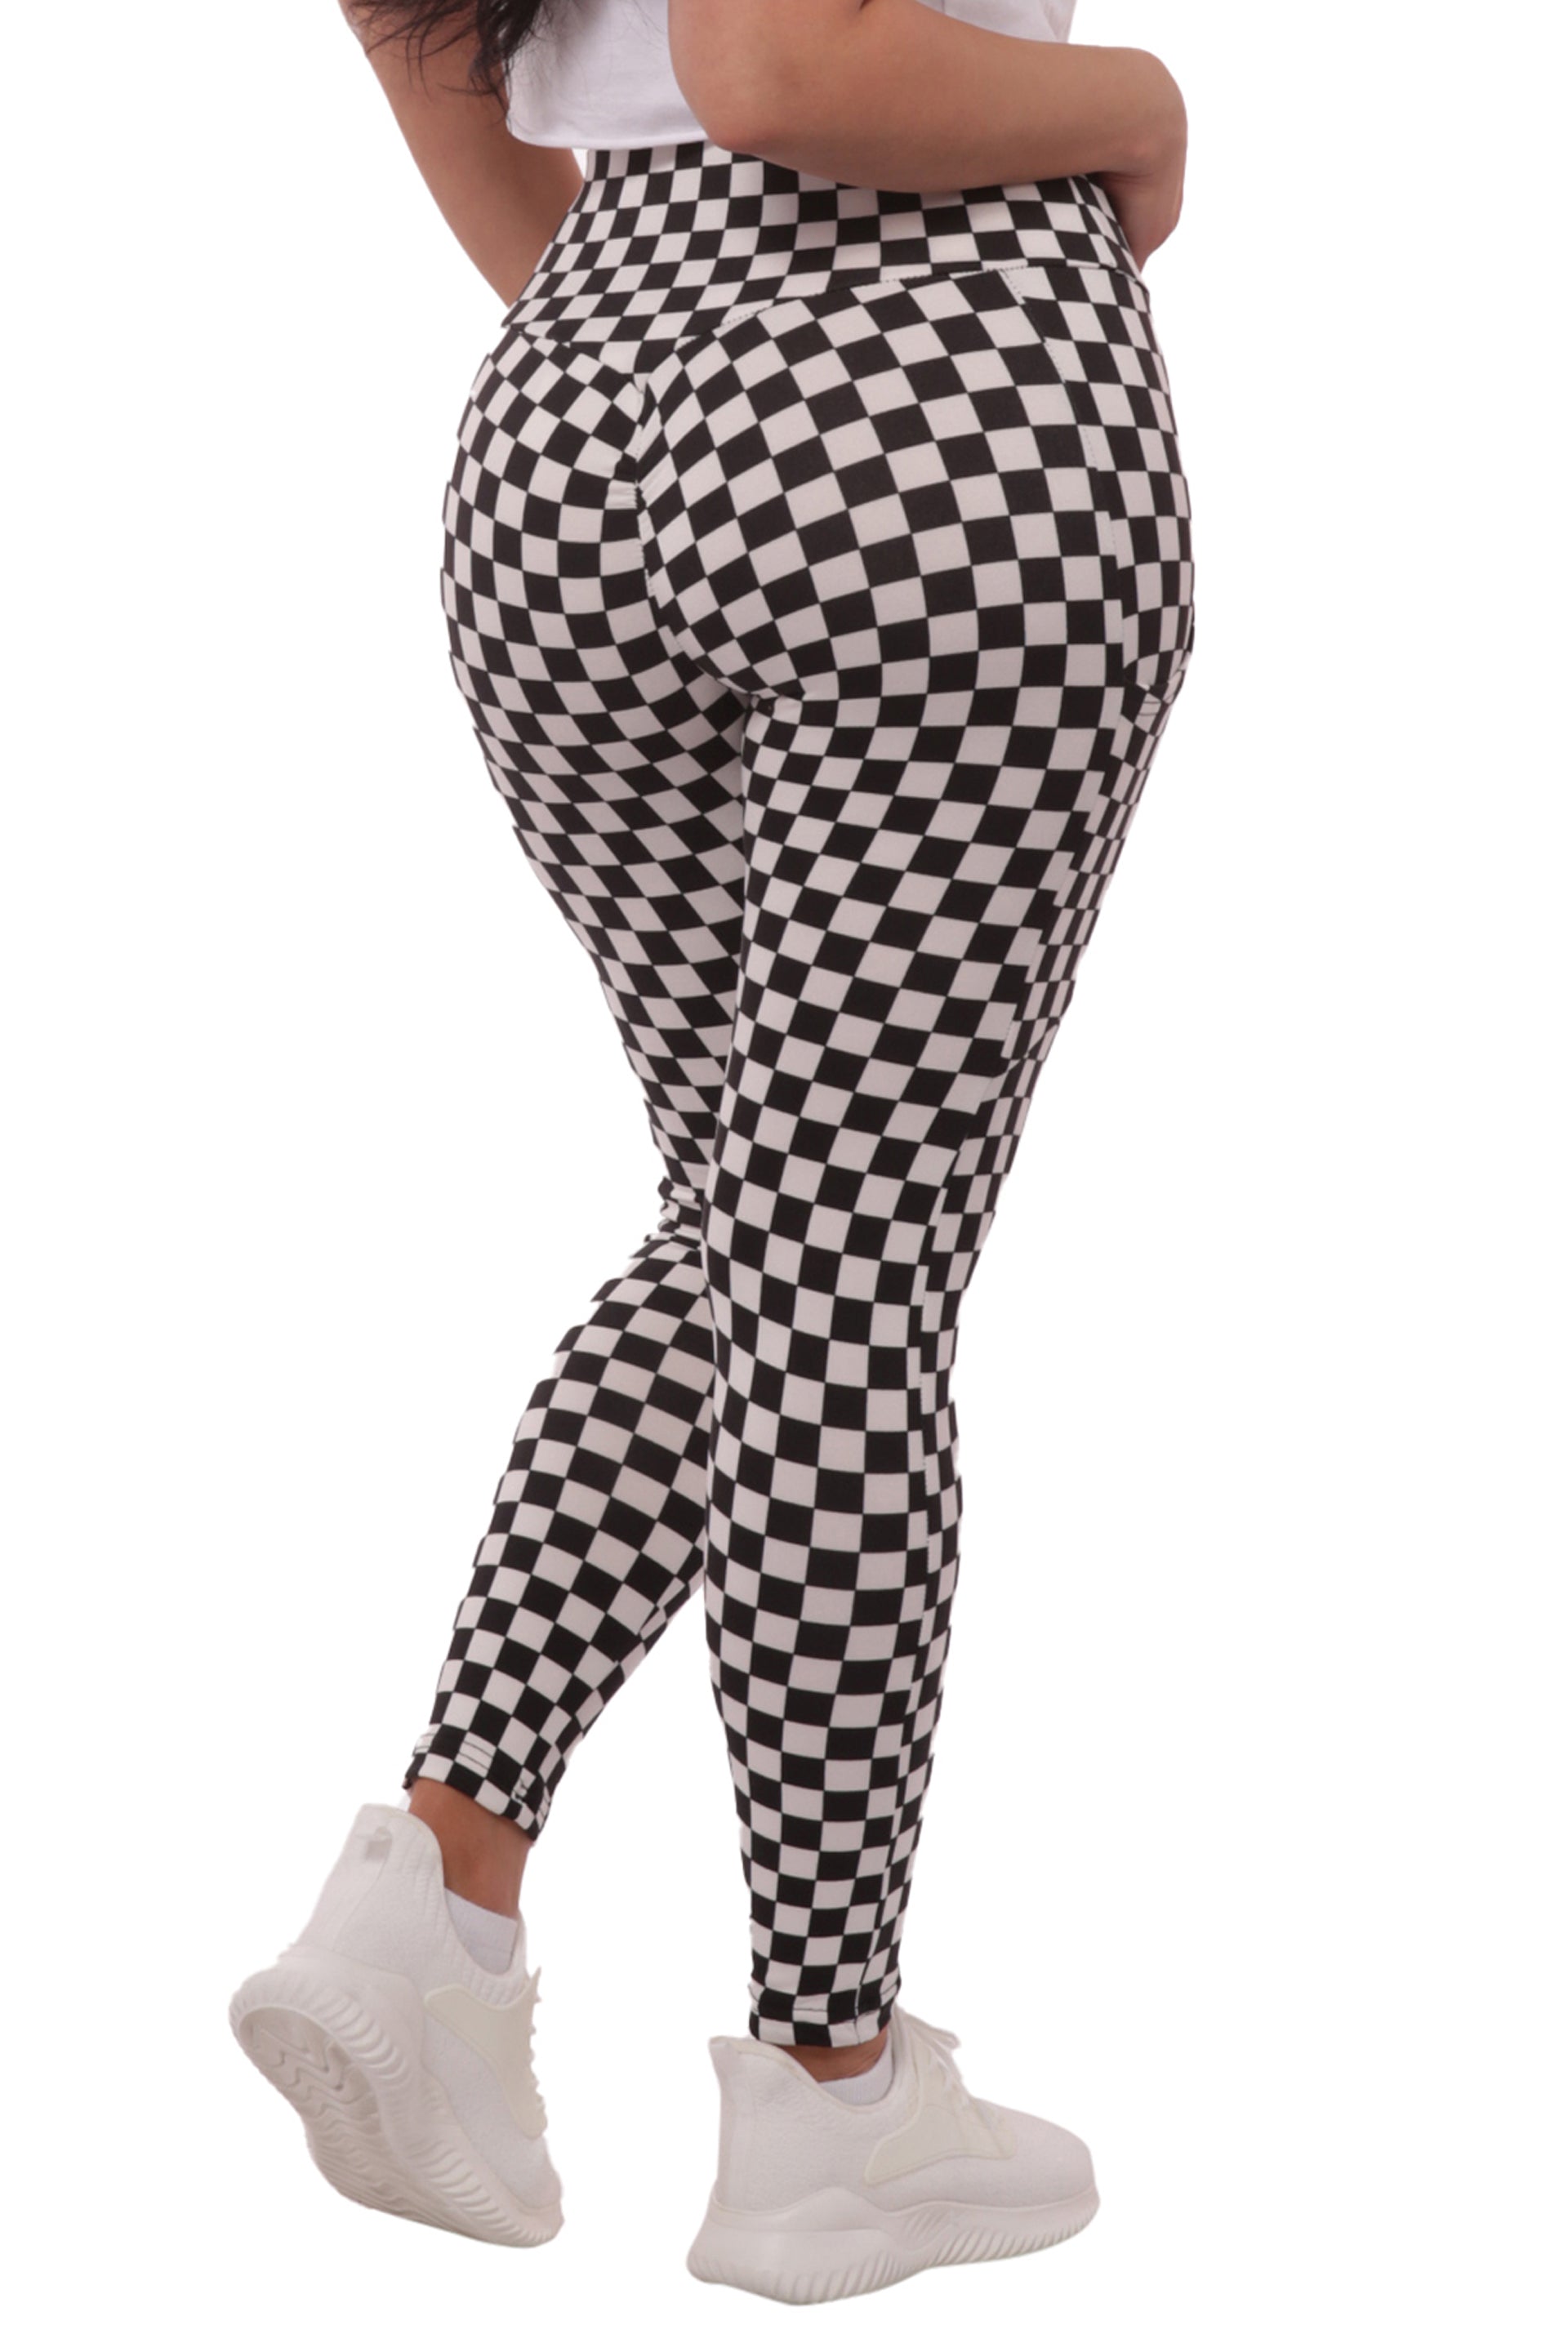 Wholesale Womens High Waist Fleece Lined Leggings With Side Pockets - Black & White Checkered - S&G Apparel